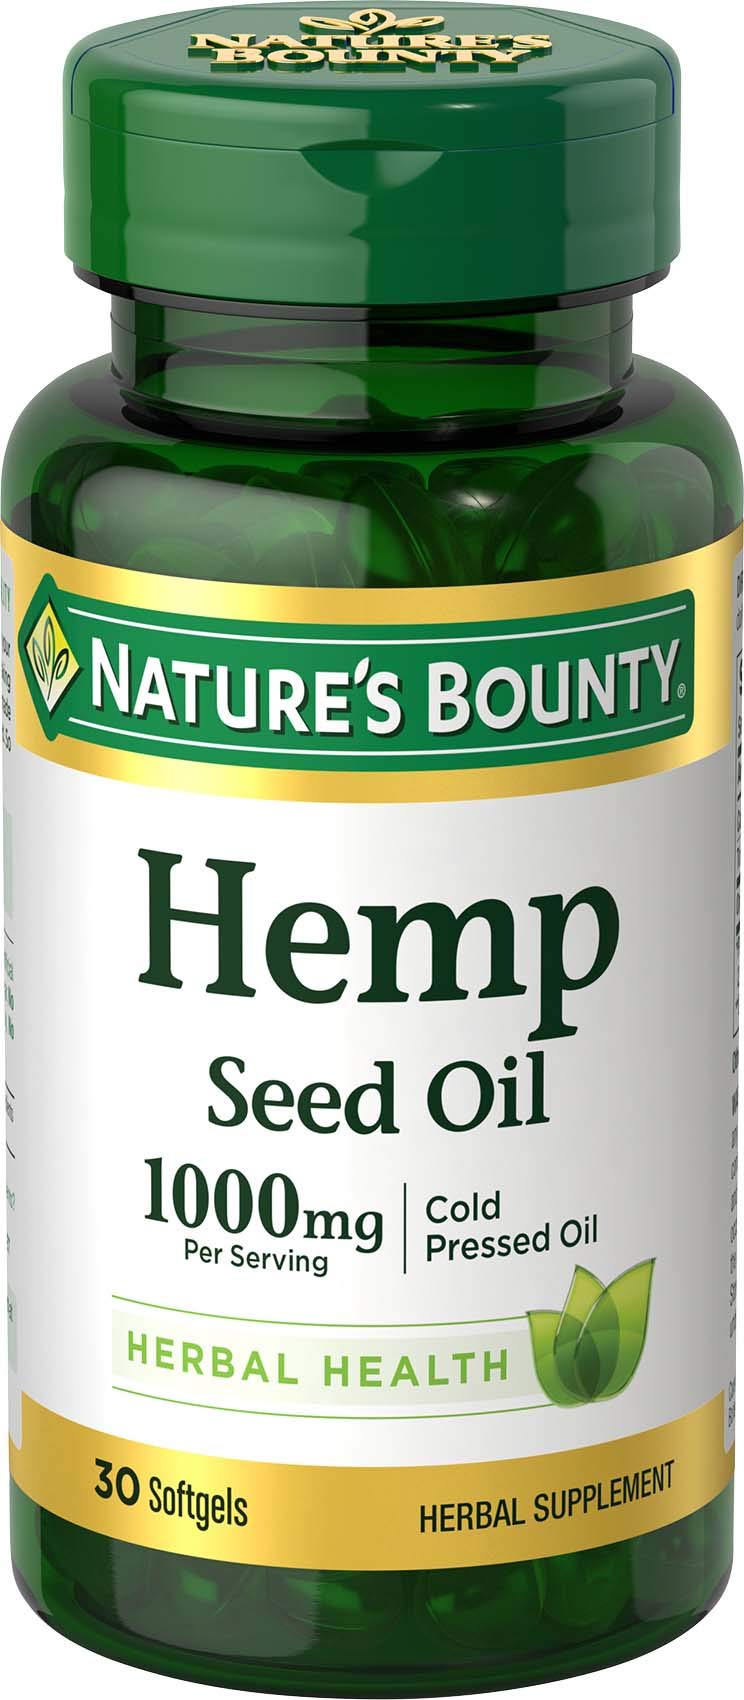 Hemp Seed Oil by Nature's Bounty, Herbal Supplement, 1000mg Cold Pressed  Oil, 30 Softgels 1000 mg